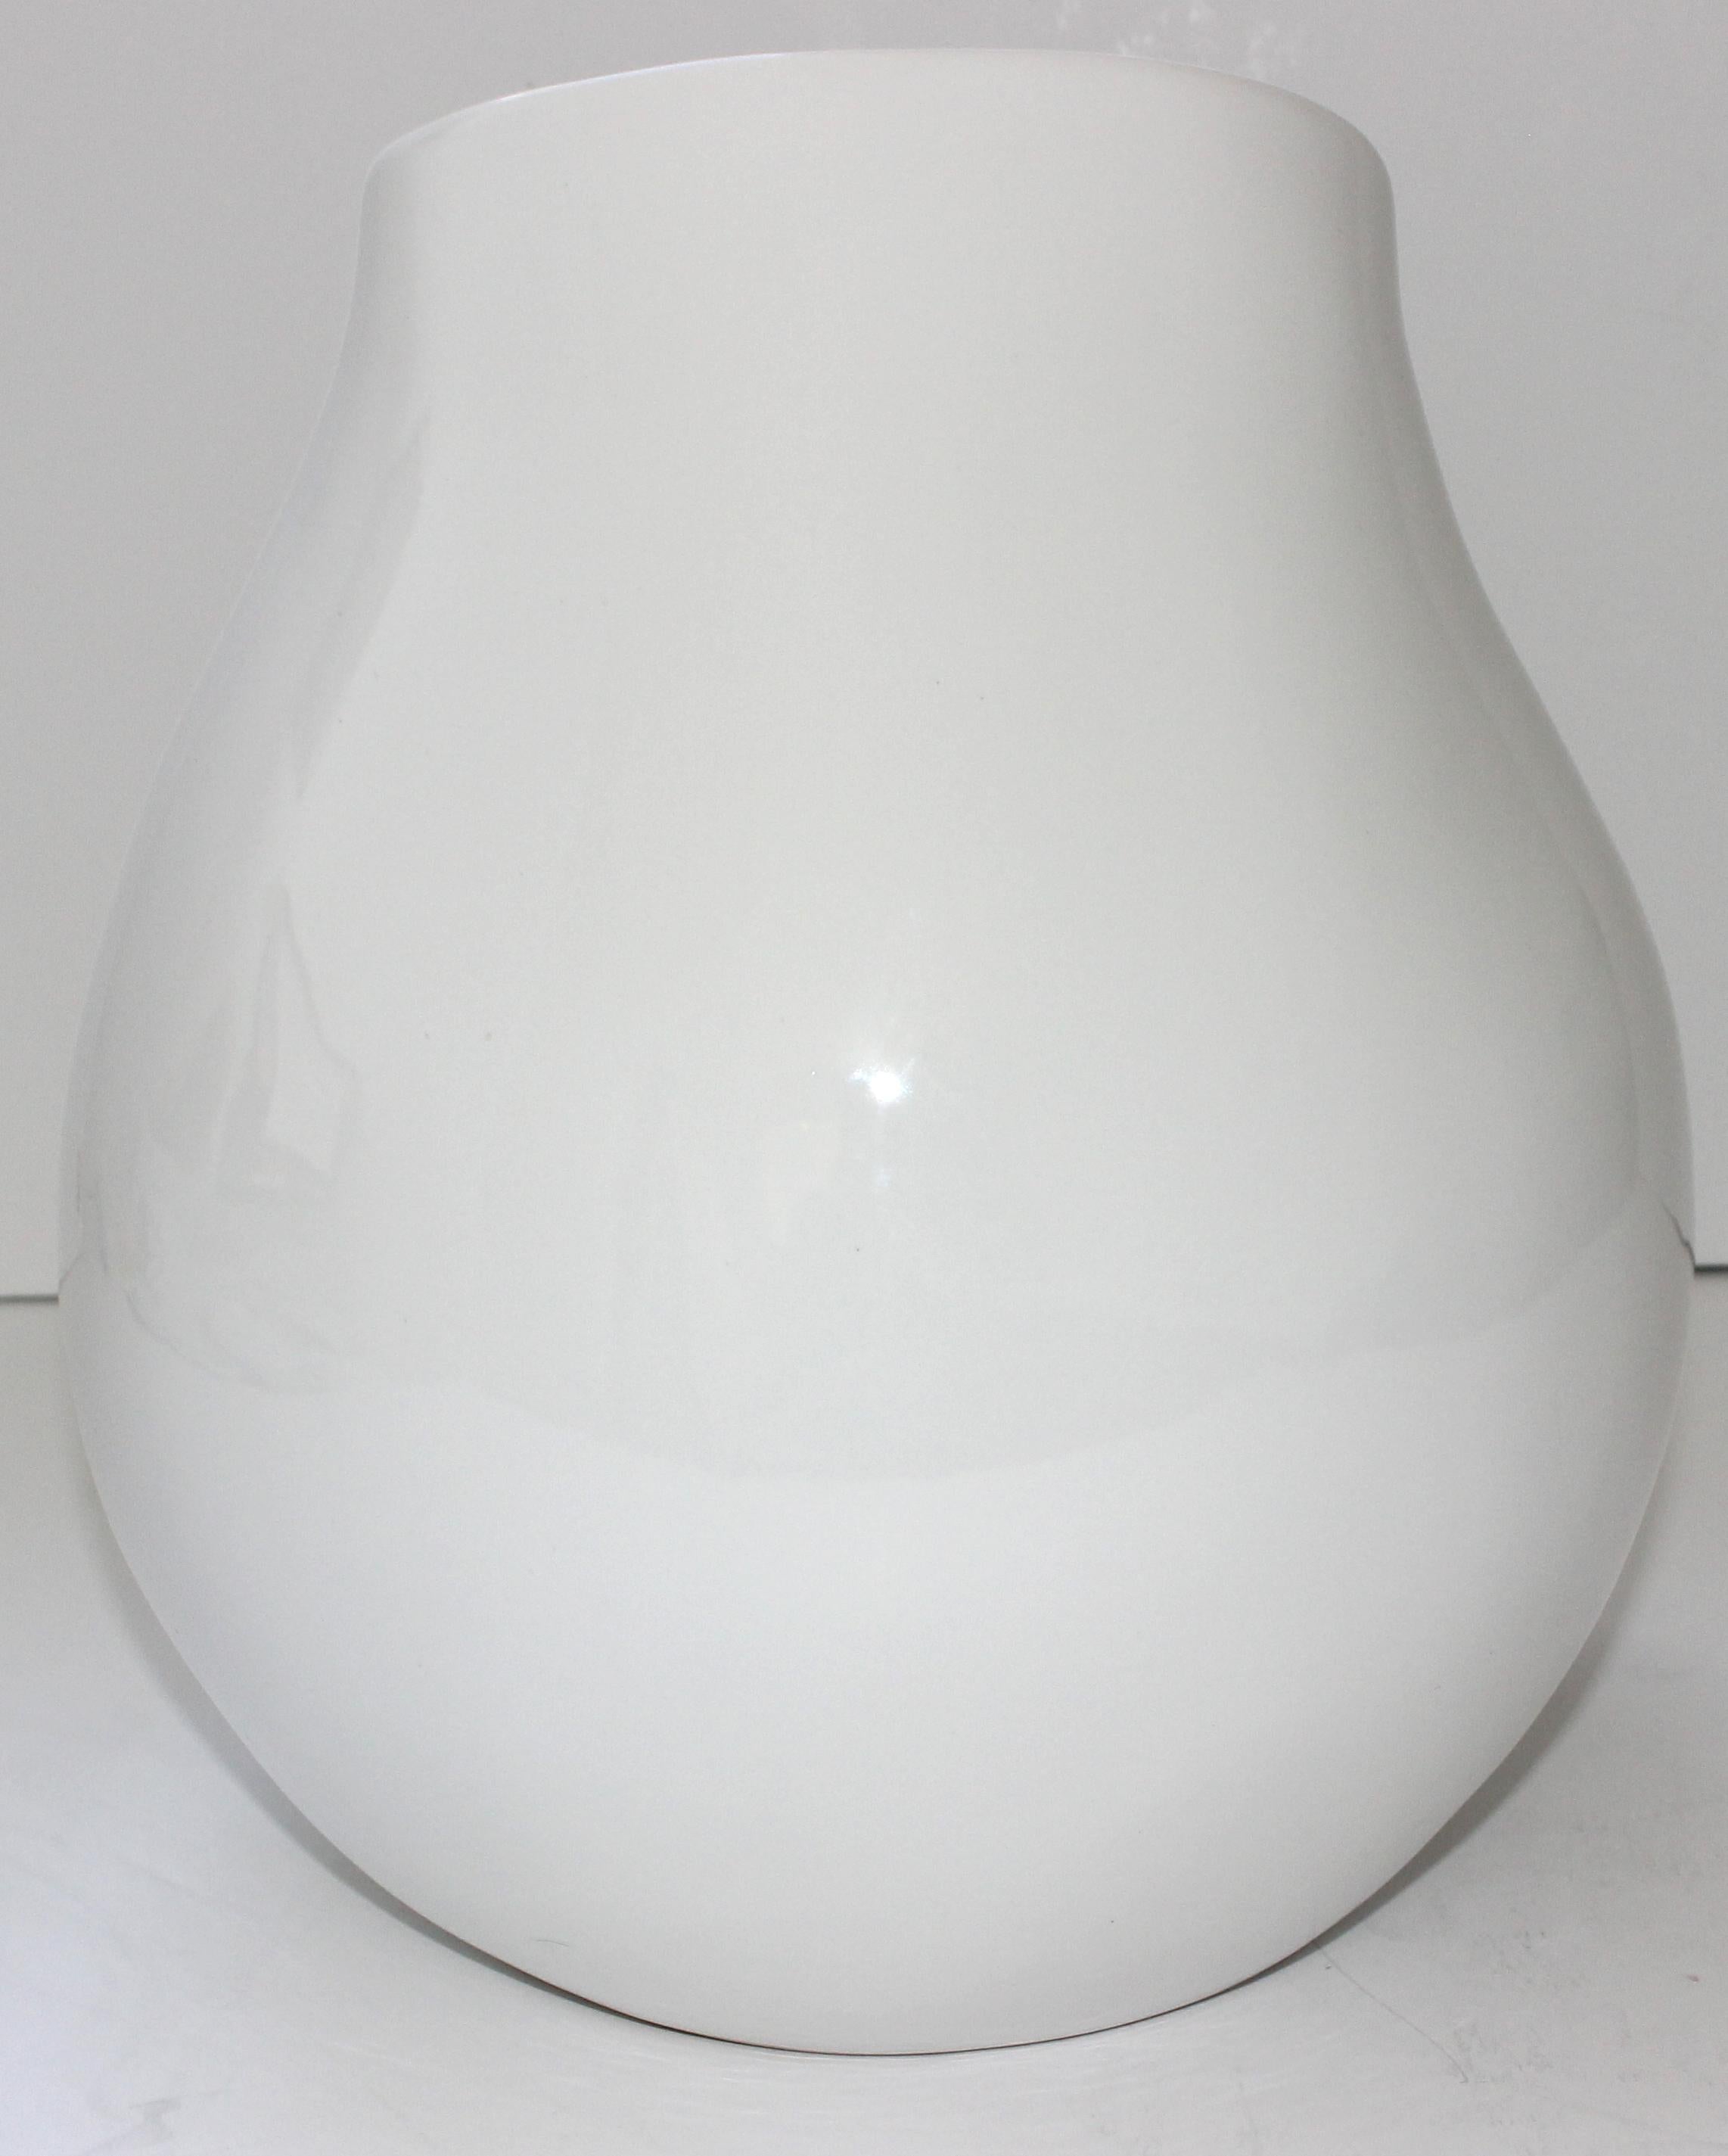 Porcelain Seashell Vase In Good Condition For Sale In West Palm Beach, FL